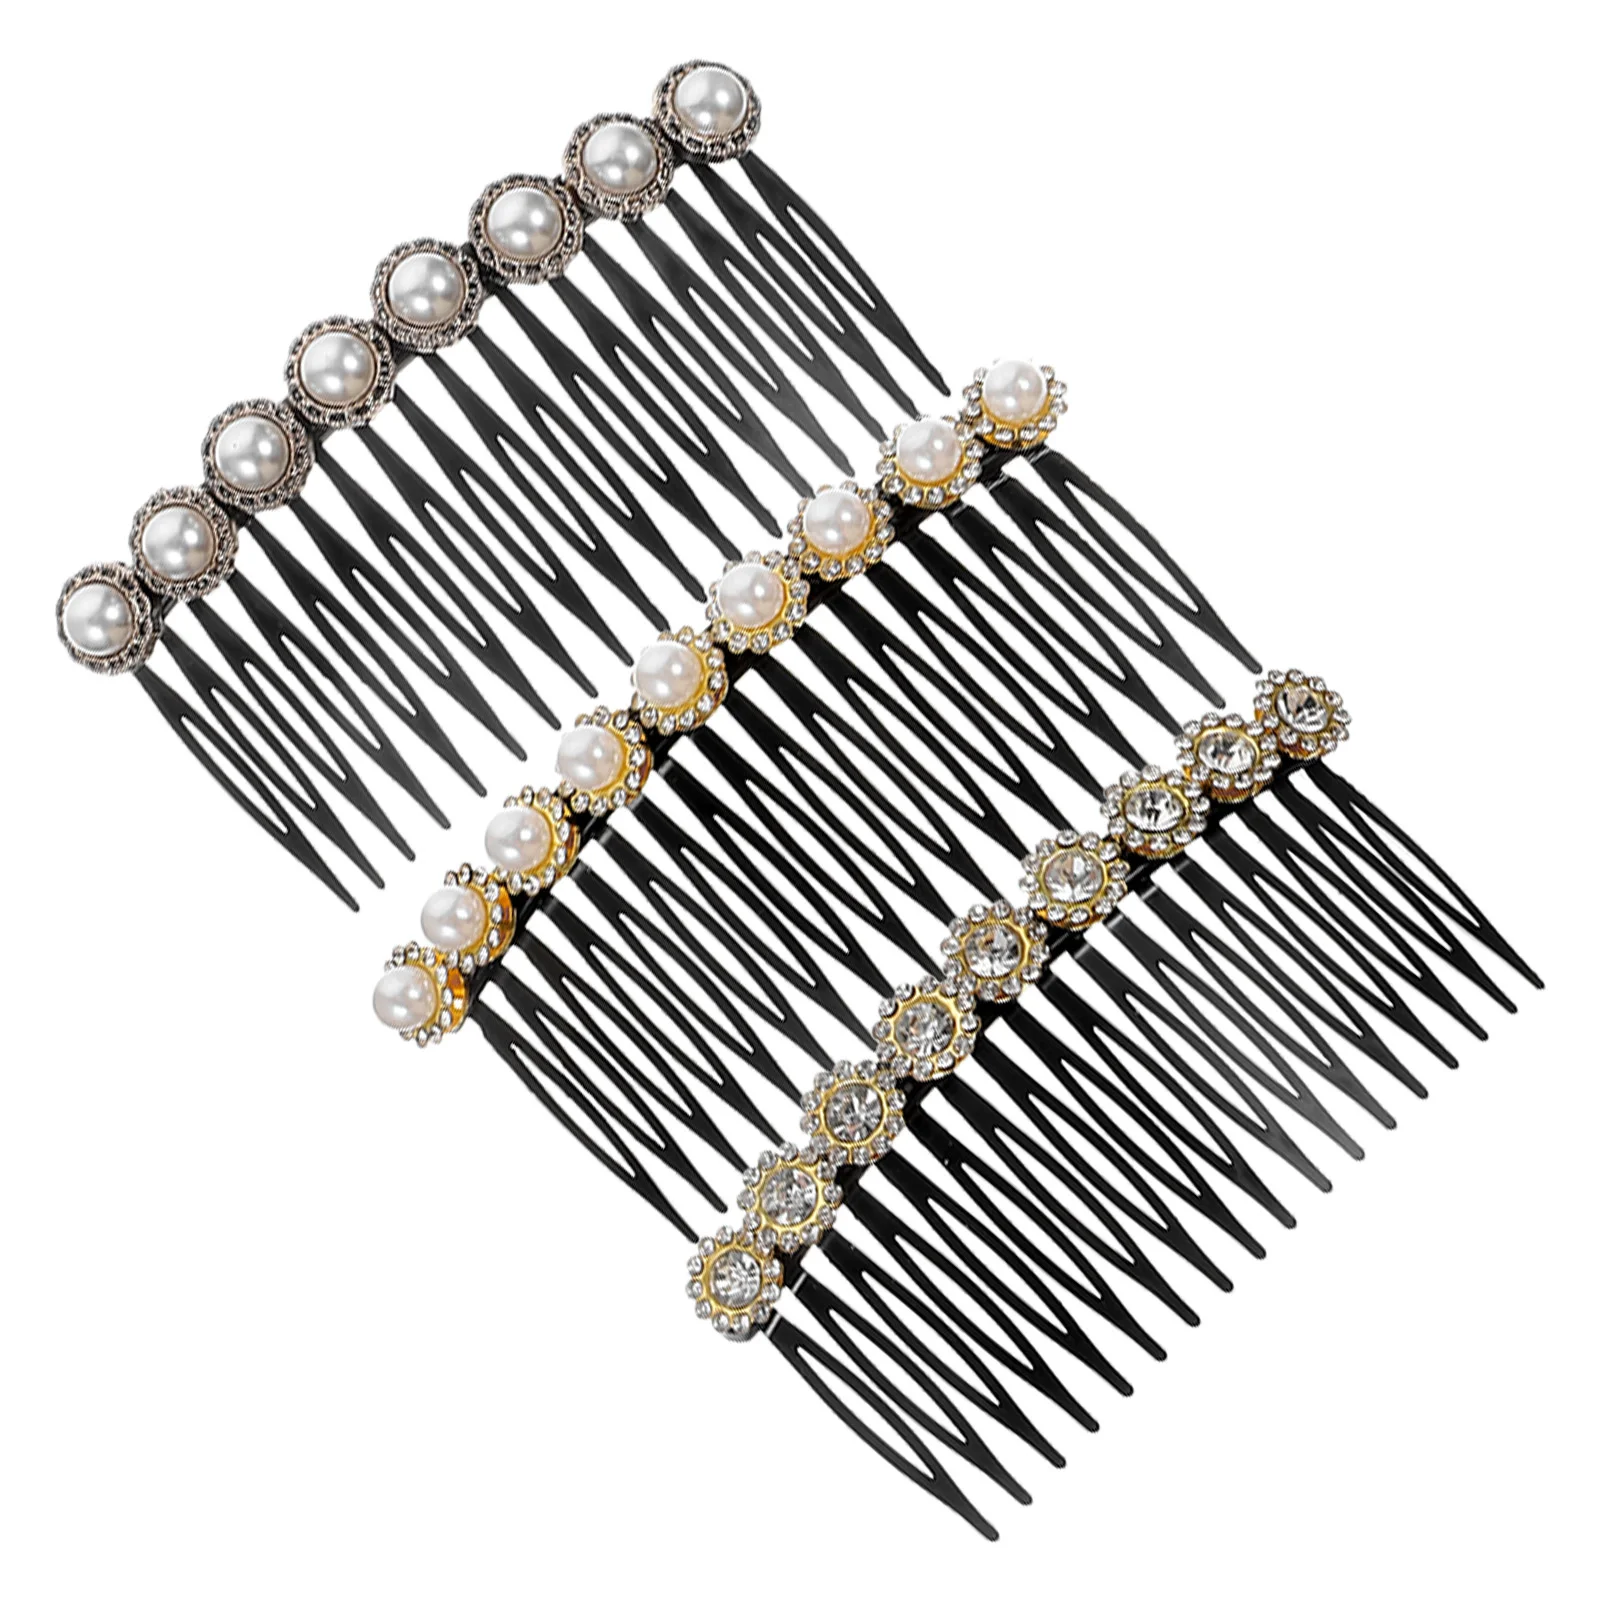 3 Pcs Crystal Hair Comb Broken Hairpin on Female Back of Head Side Comb Girl The Pearl Accessories Combs for Women Miss